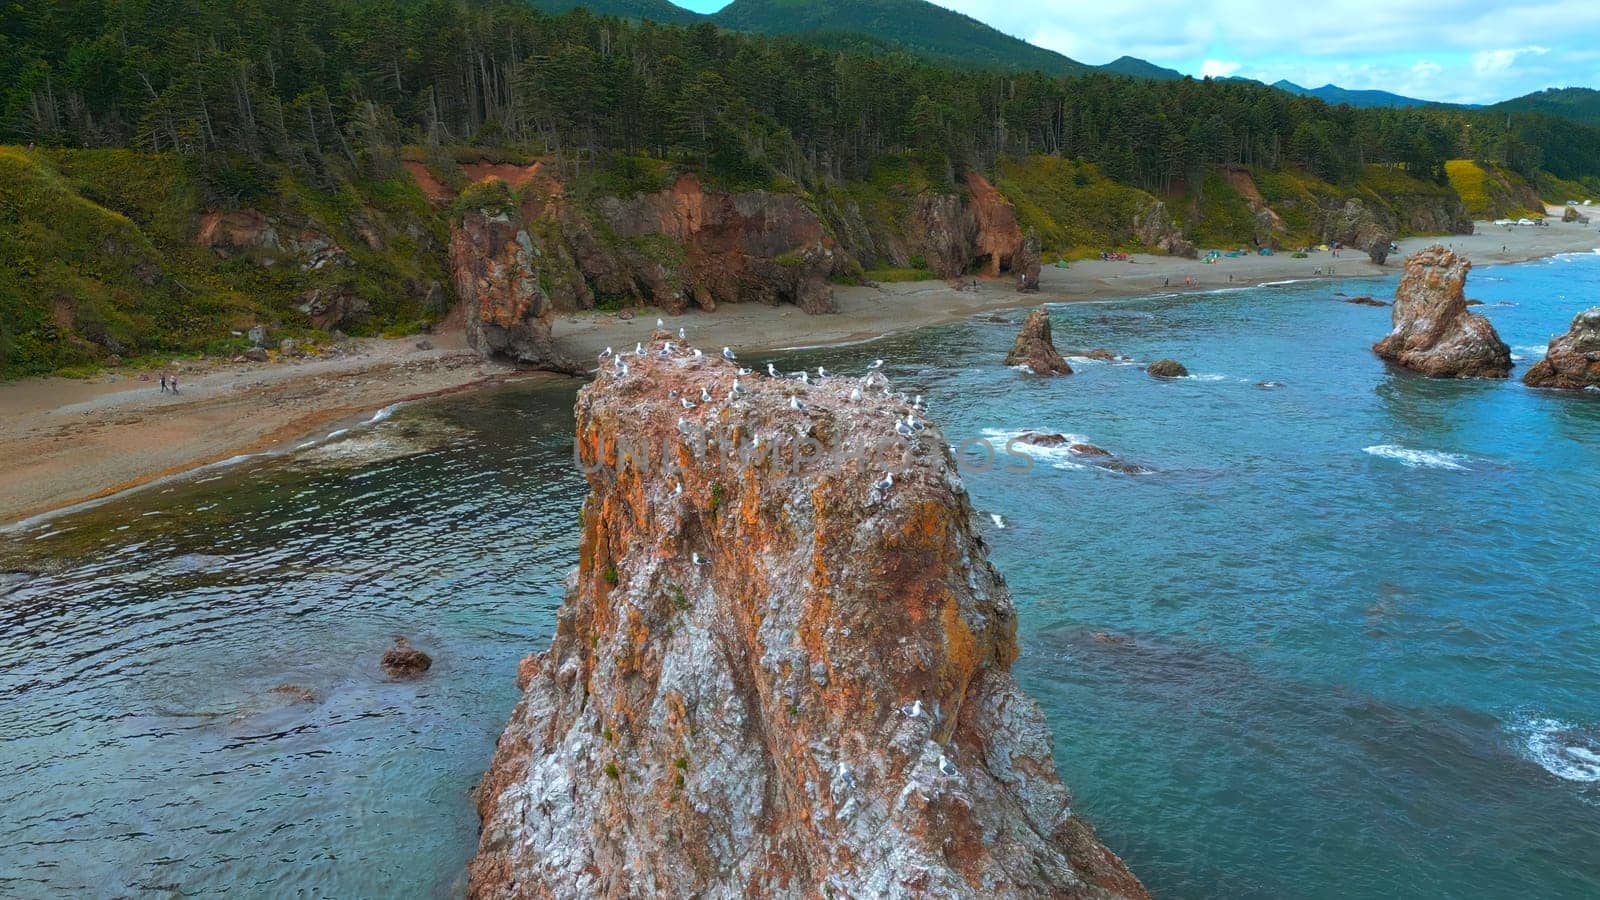 Top view of cliff with flock of seagulls. Clip. Wild coast with marine fauna on rocks in sea. Flocks of seagulls on sea rocks off coast of wild island by Mediawhalestock